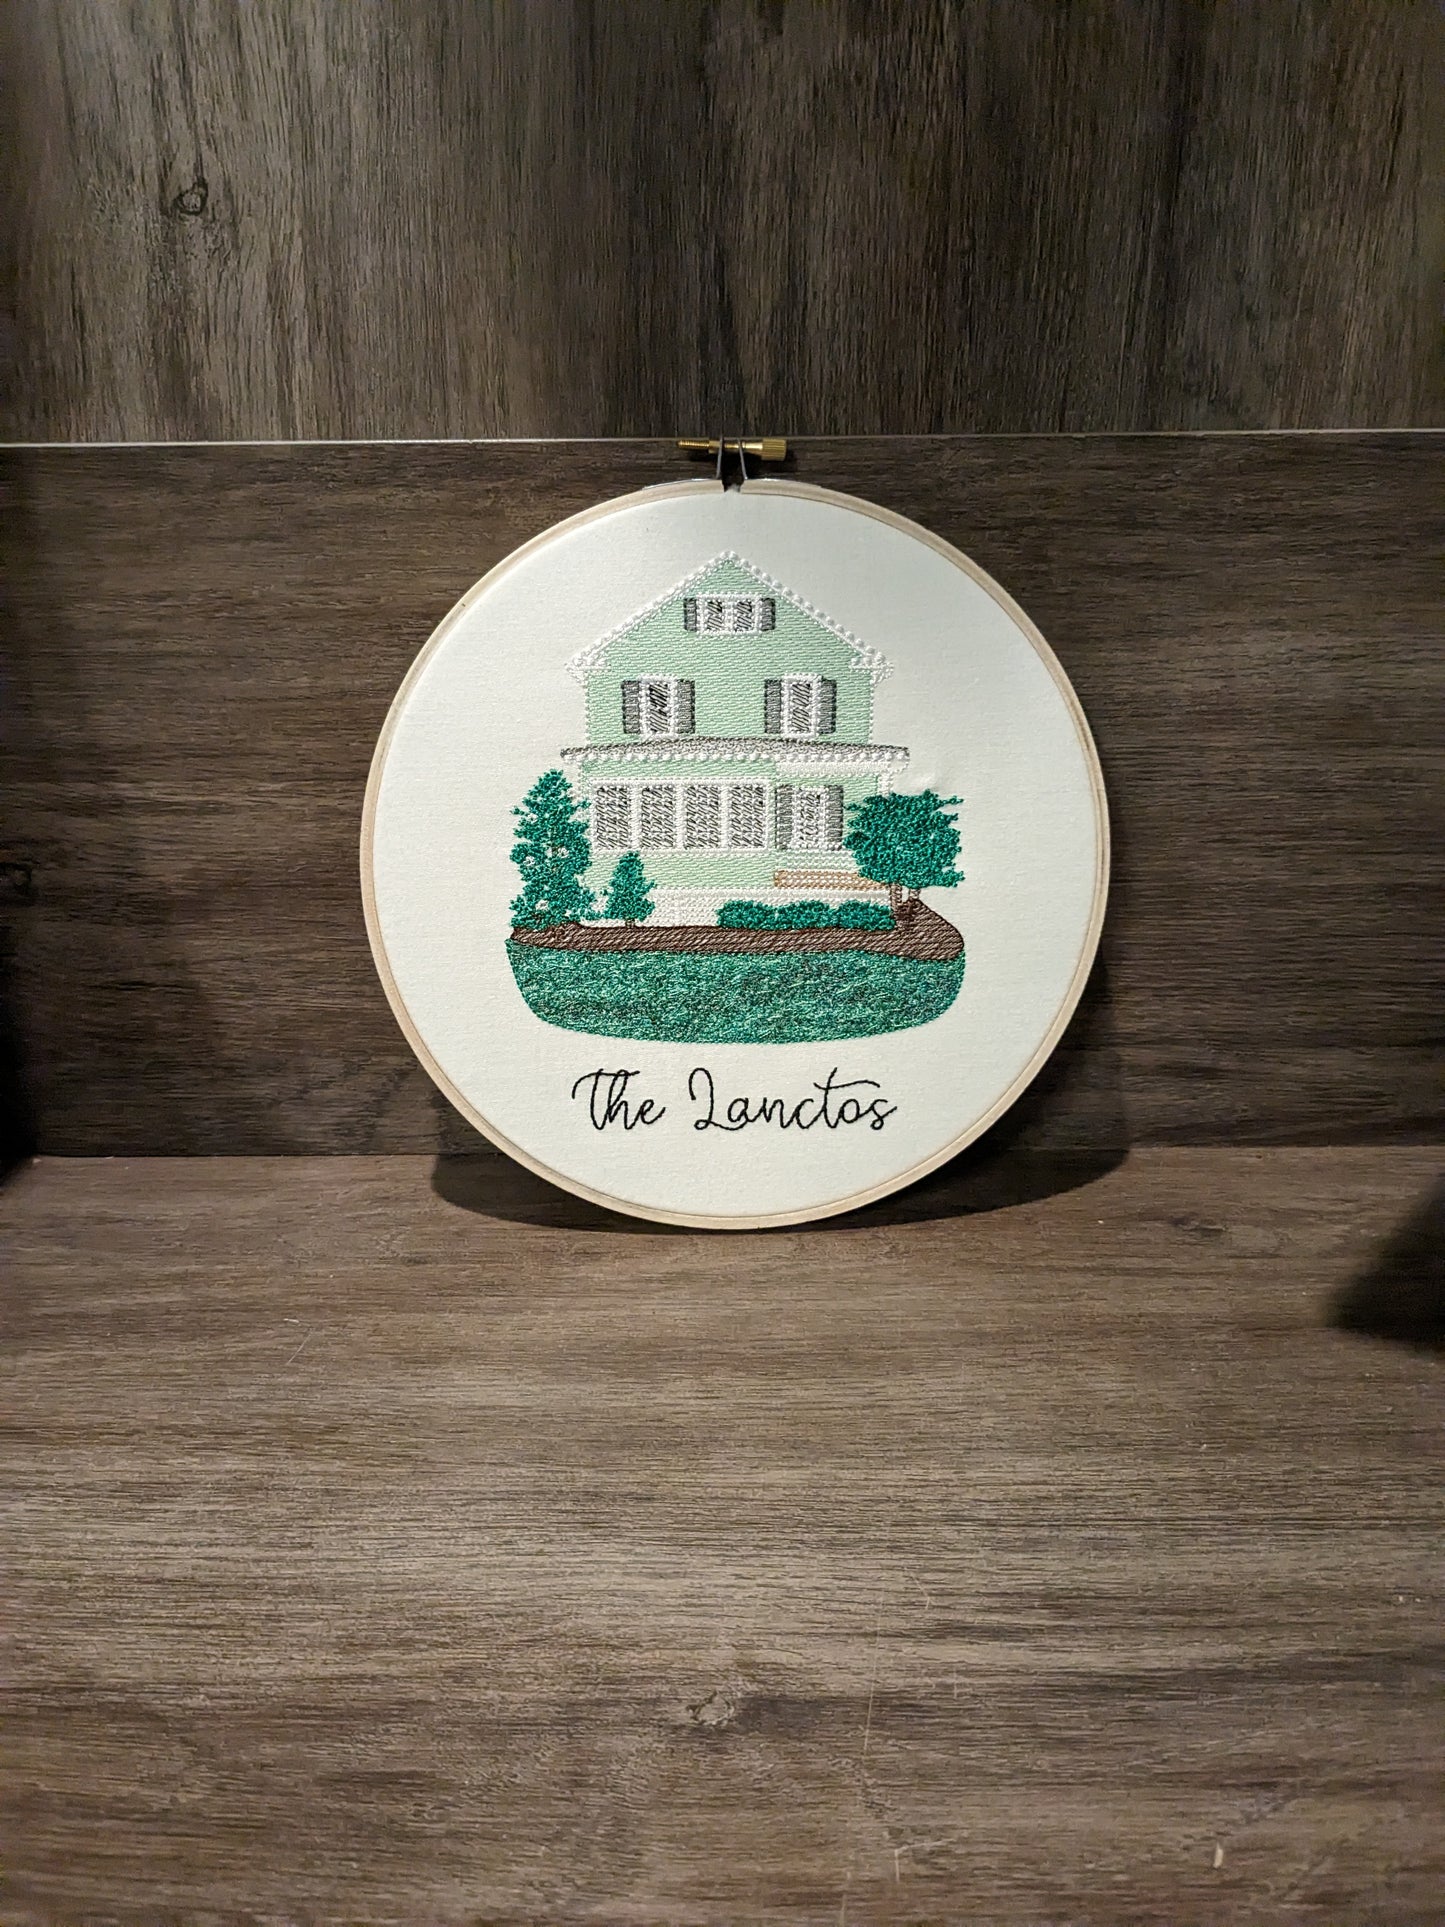 Custom embroidered home portrait in hoop